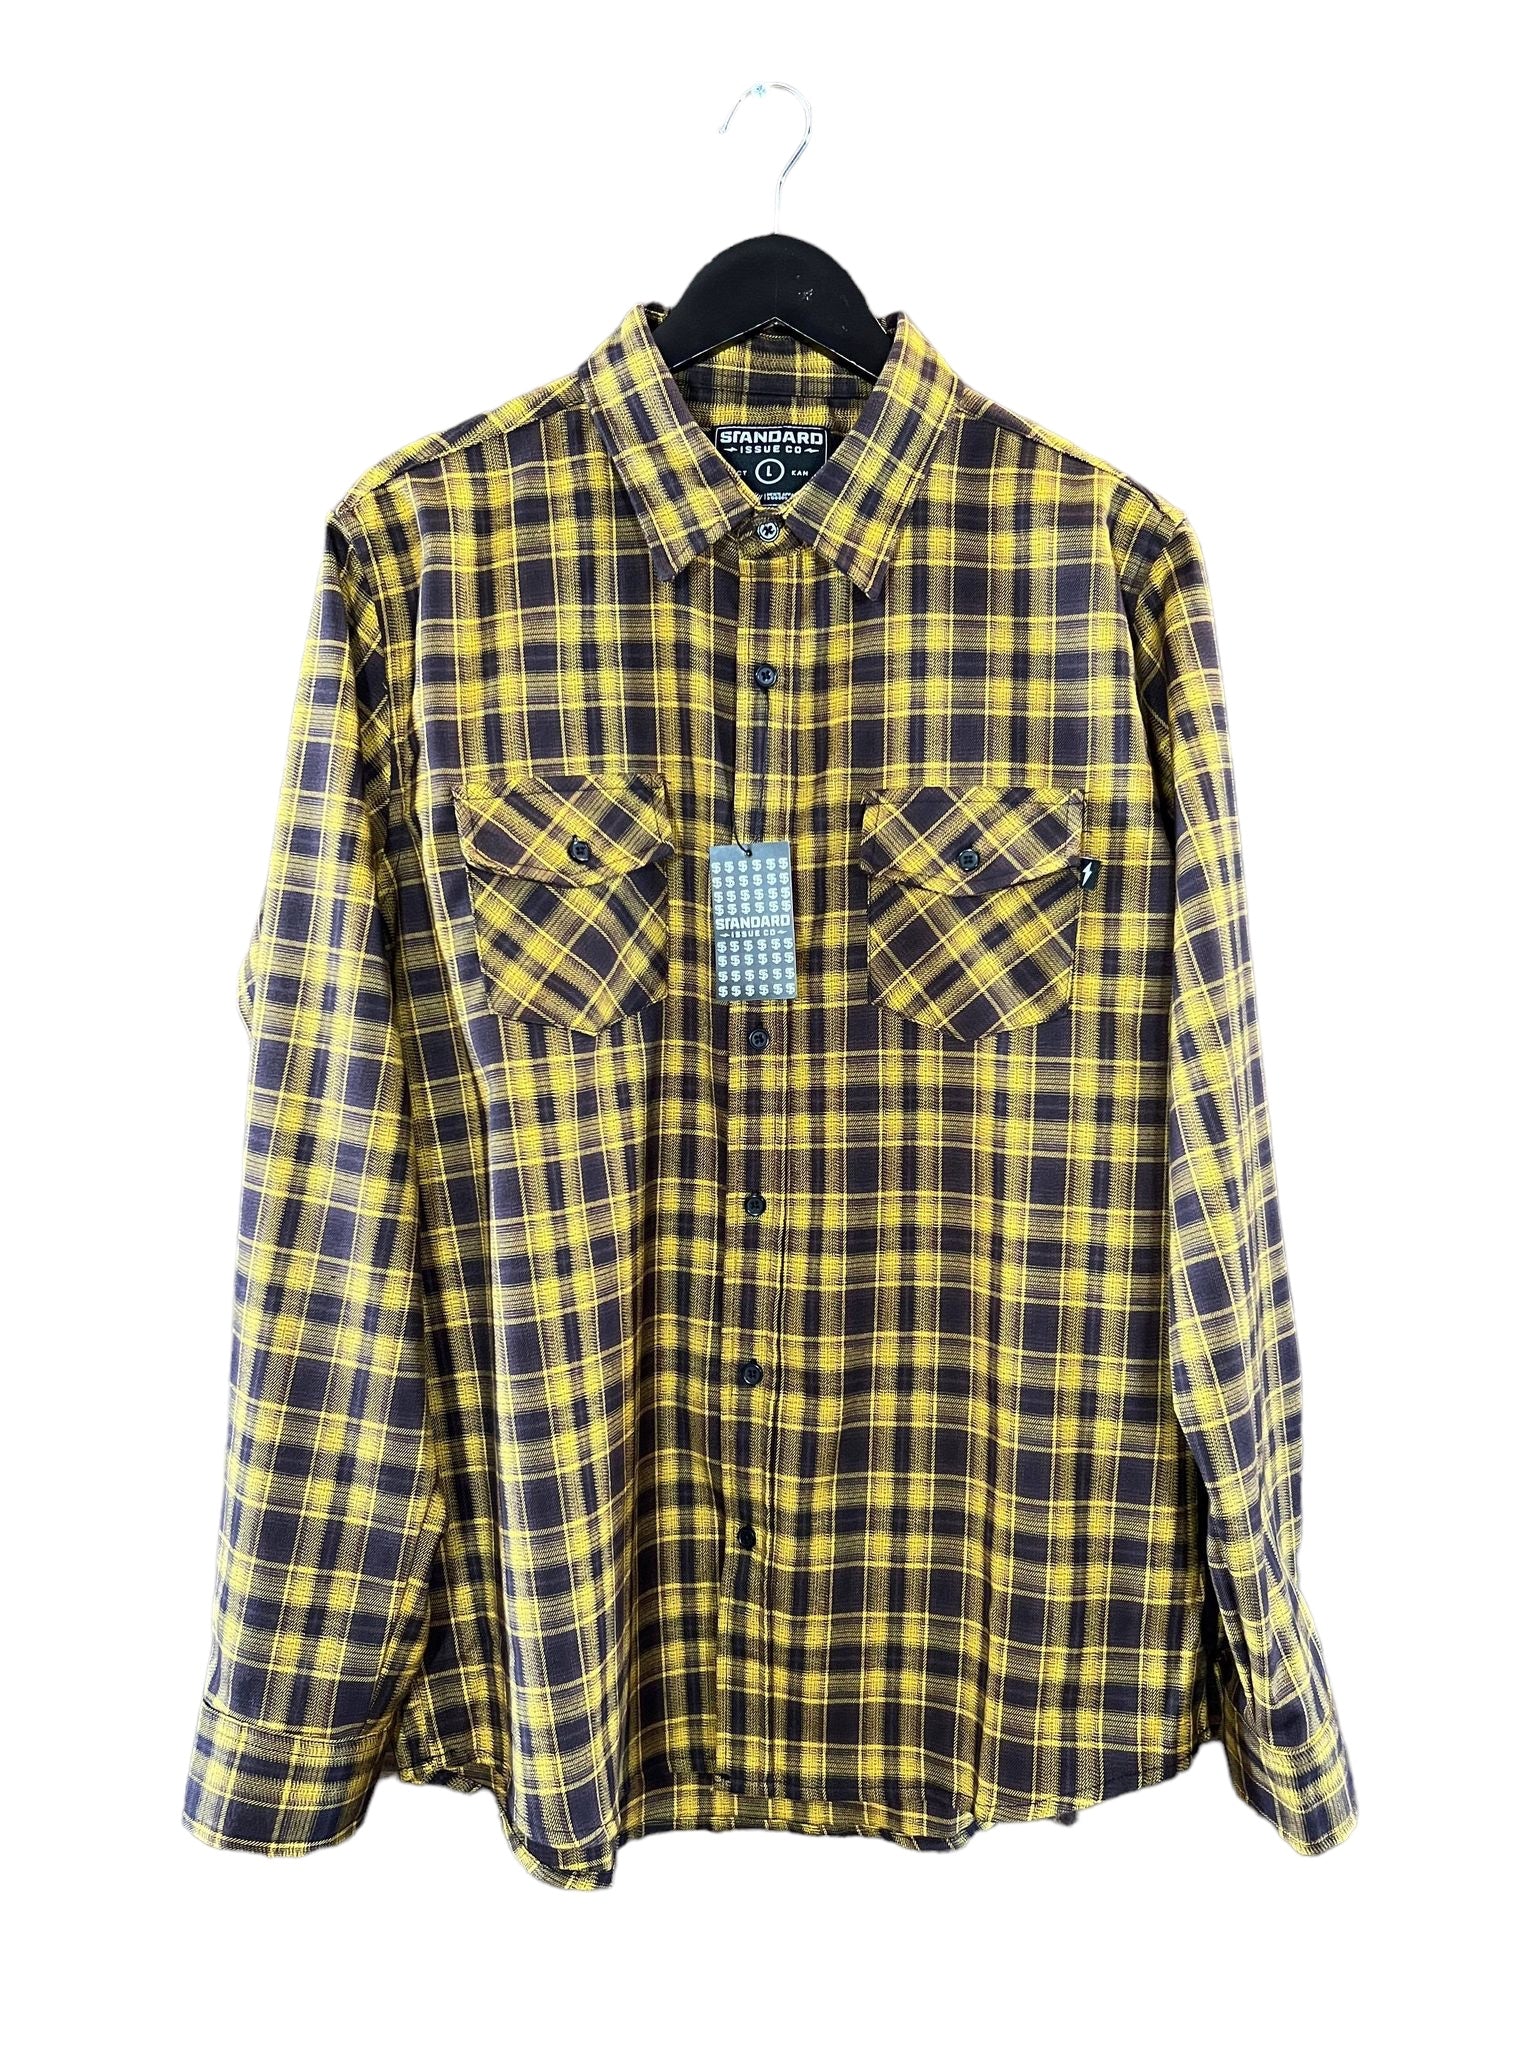 Standard Issue Co. - Shop Flannel - Chocolate/Amber Gold